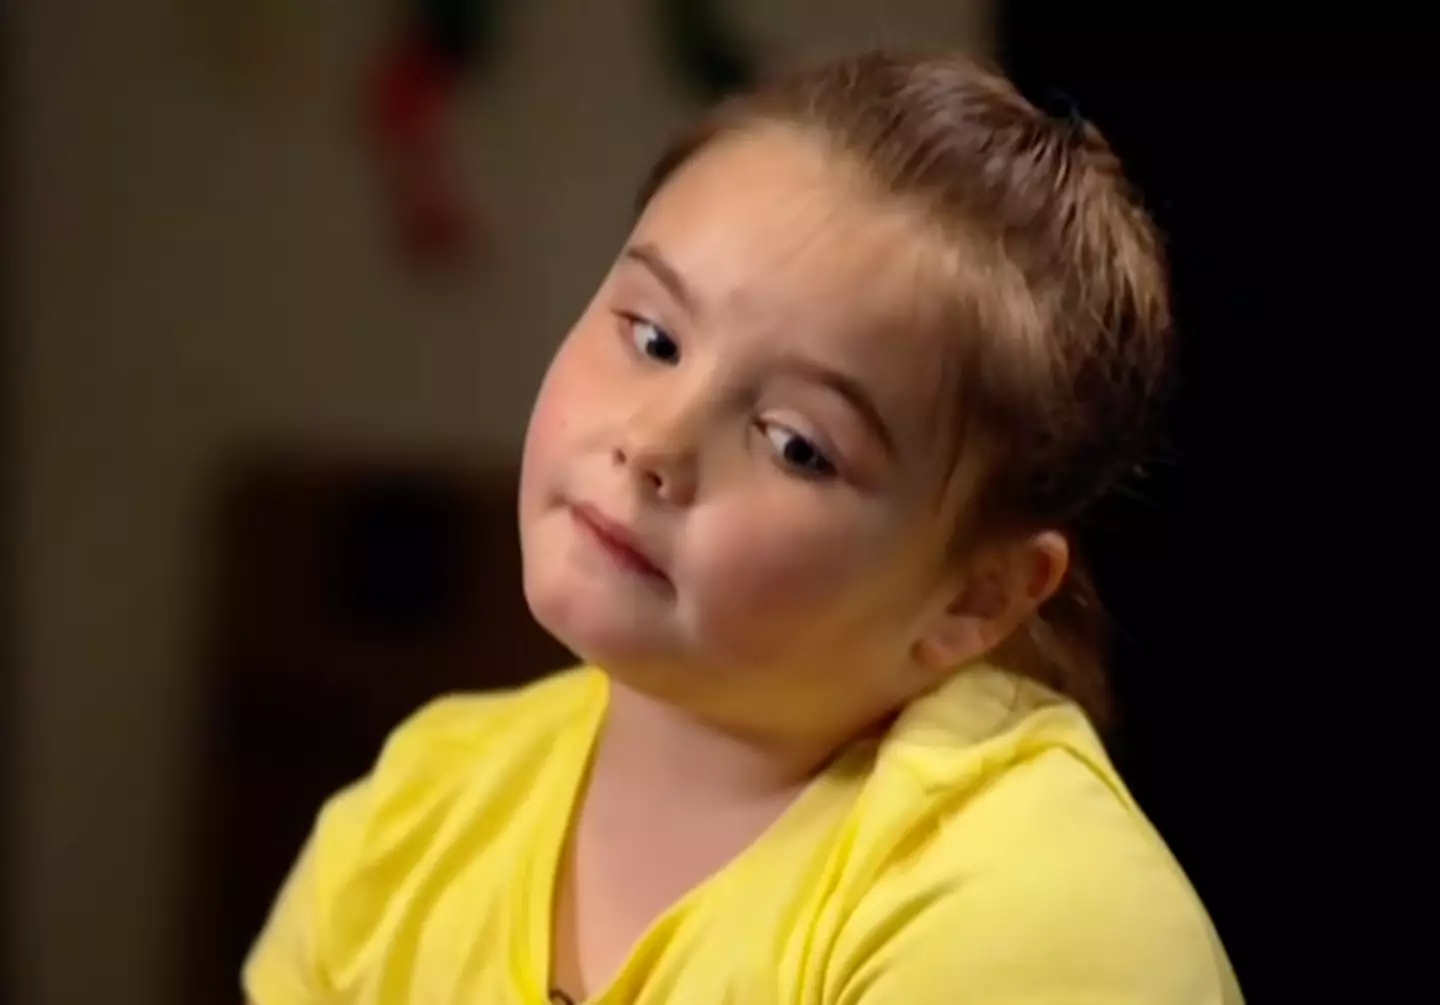 Emouree was in shock over the support for her mom. (CBS Evening News)